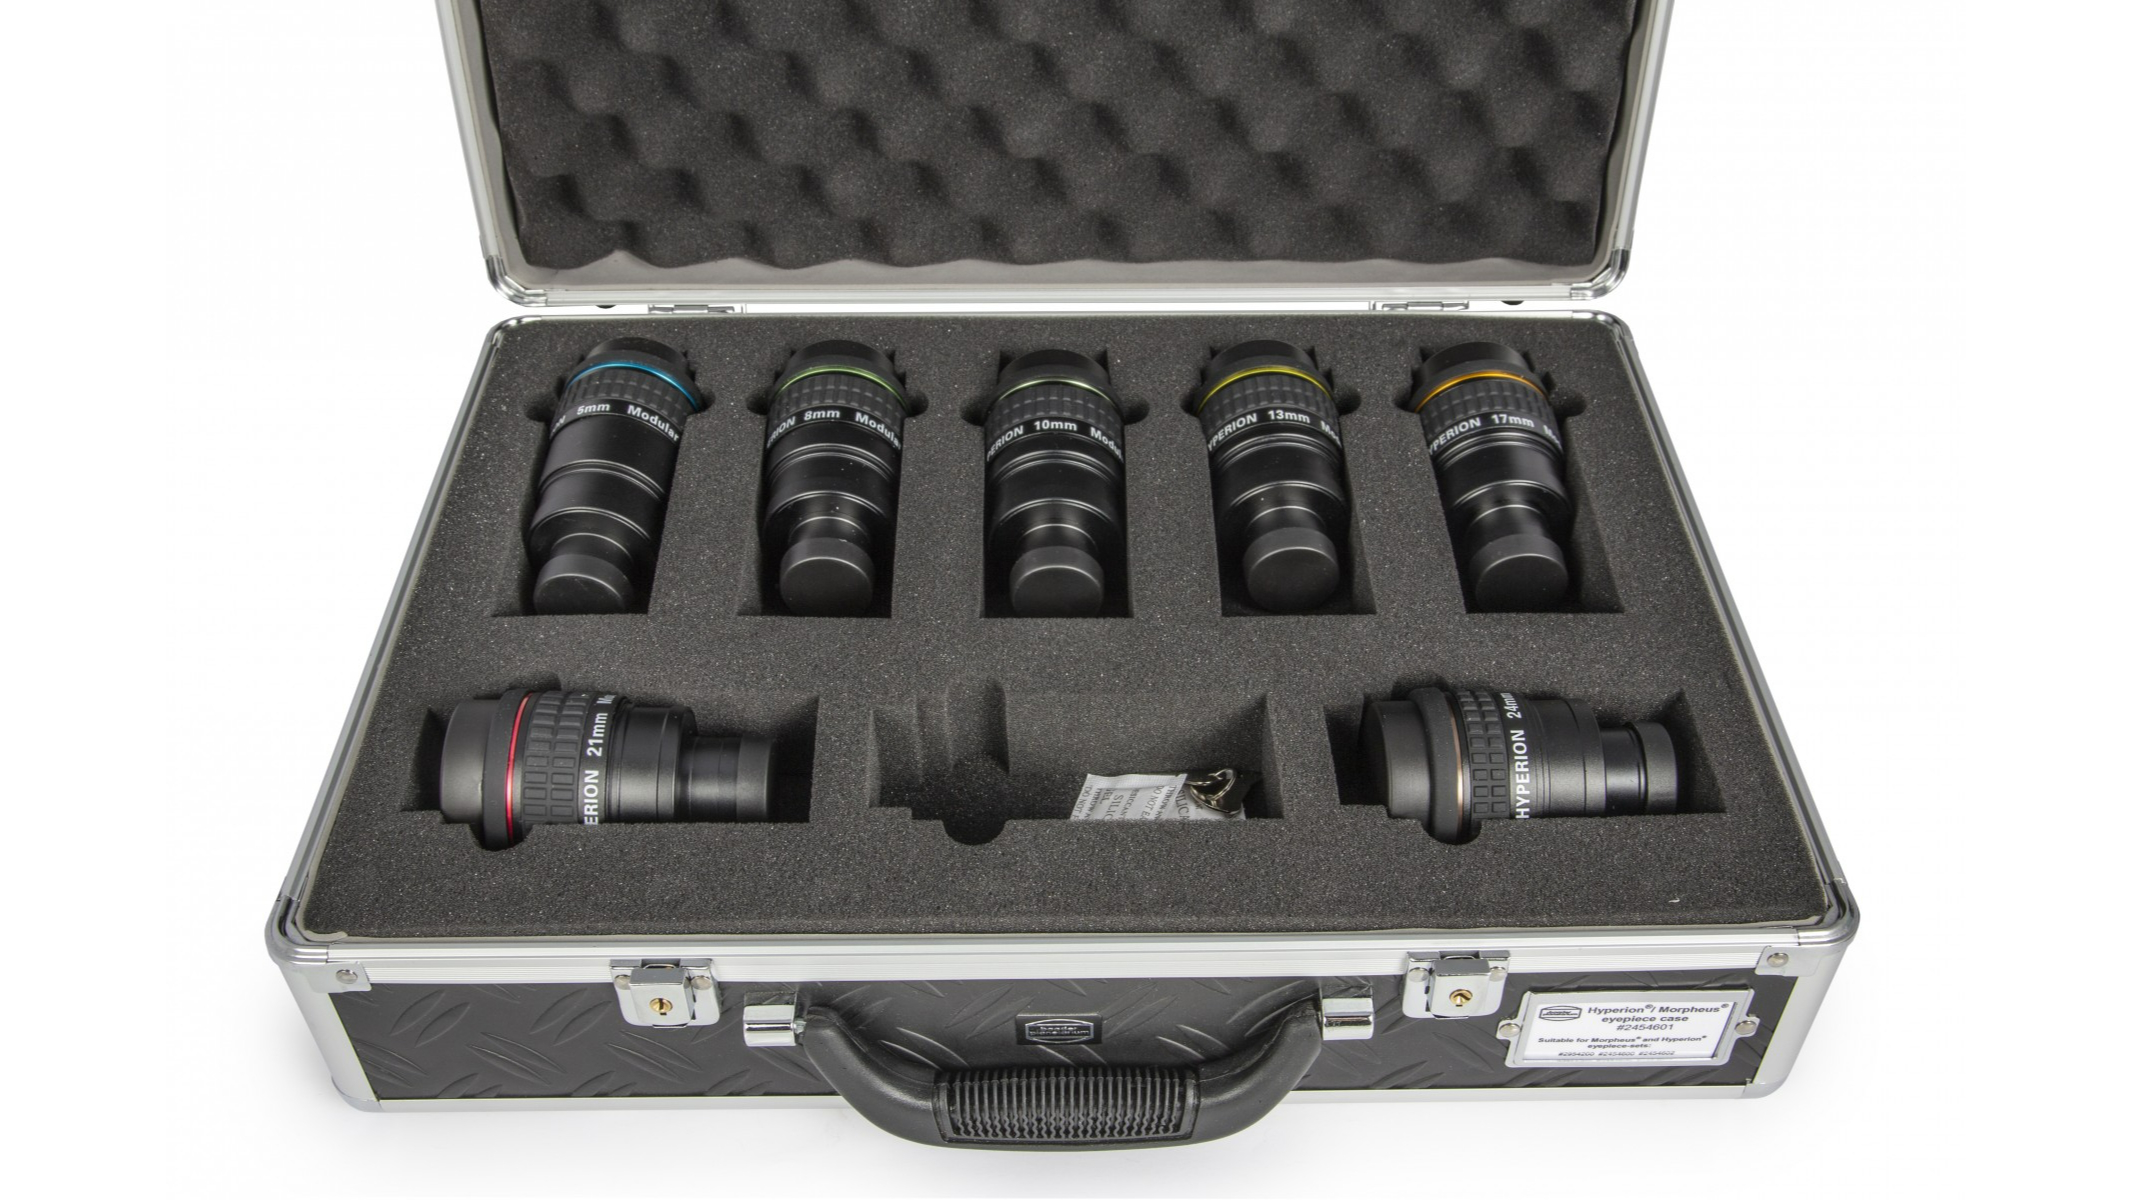 Product photos of the Baader Hyperion Eyepiece set